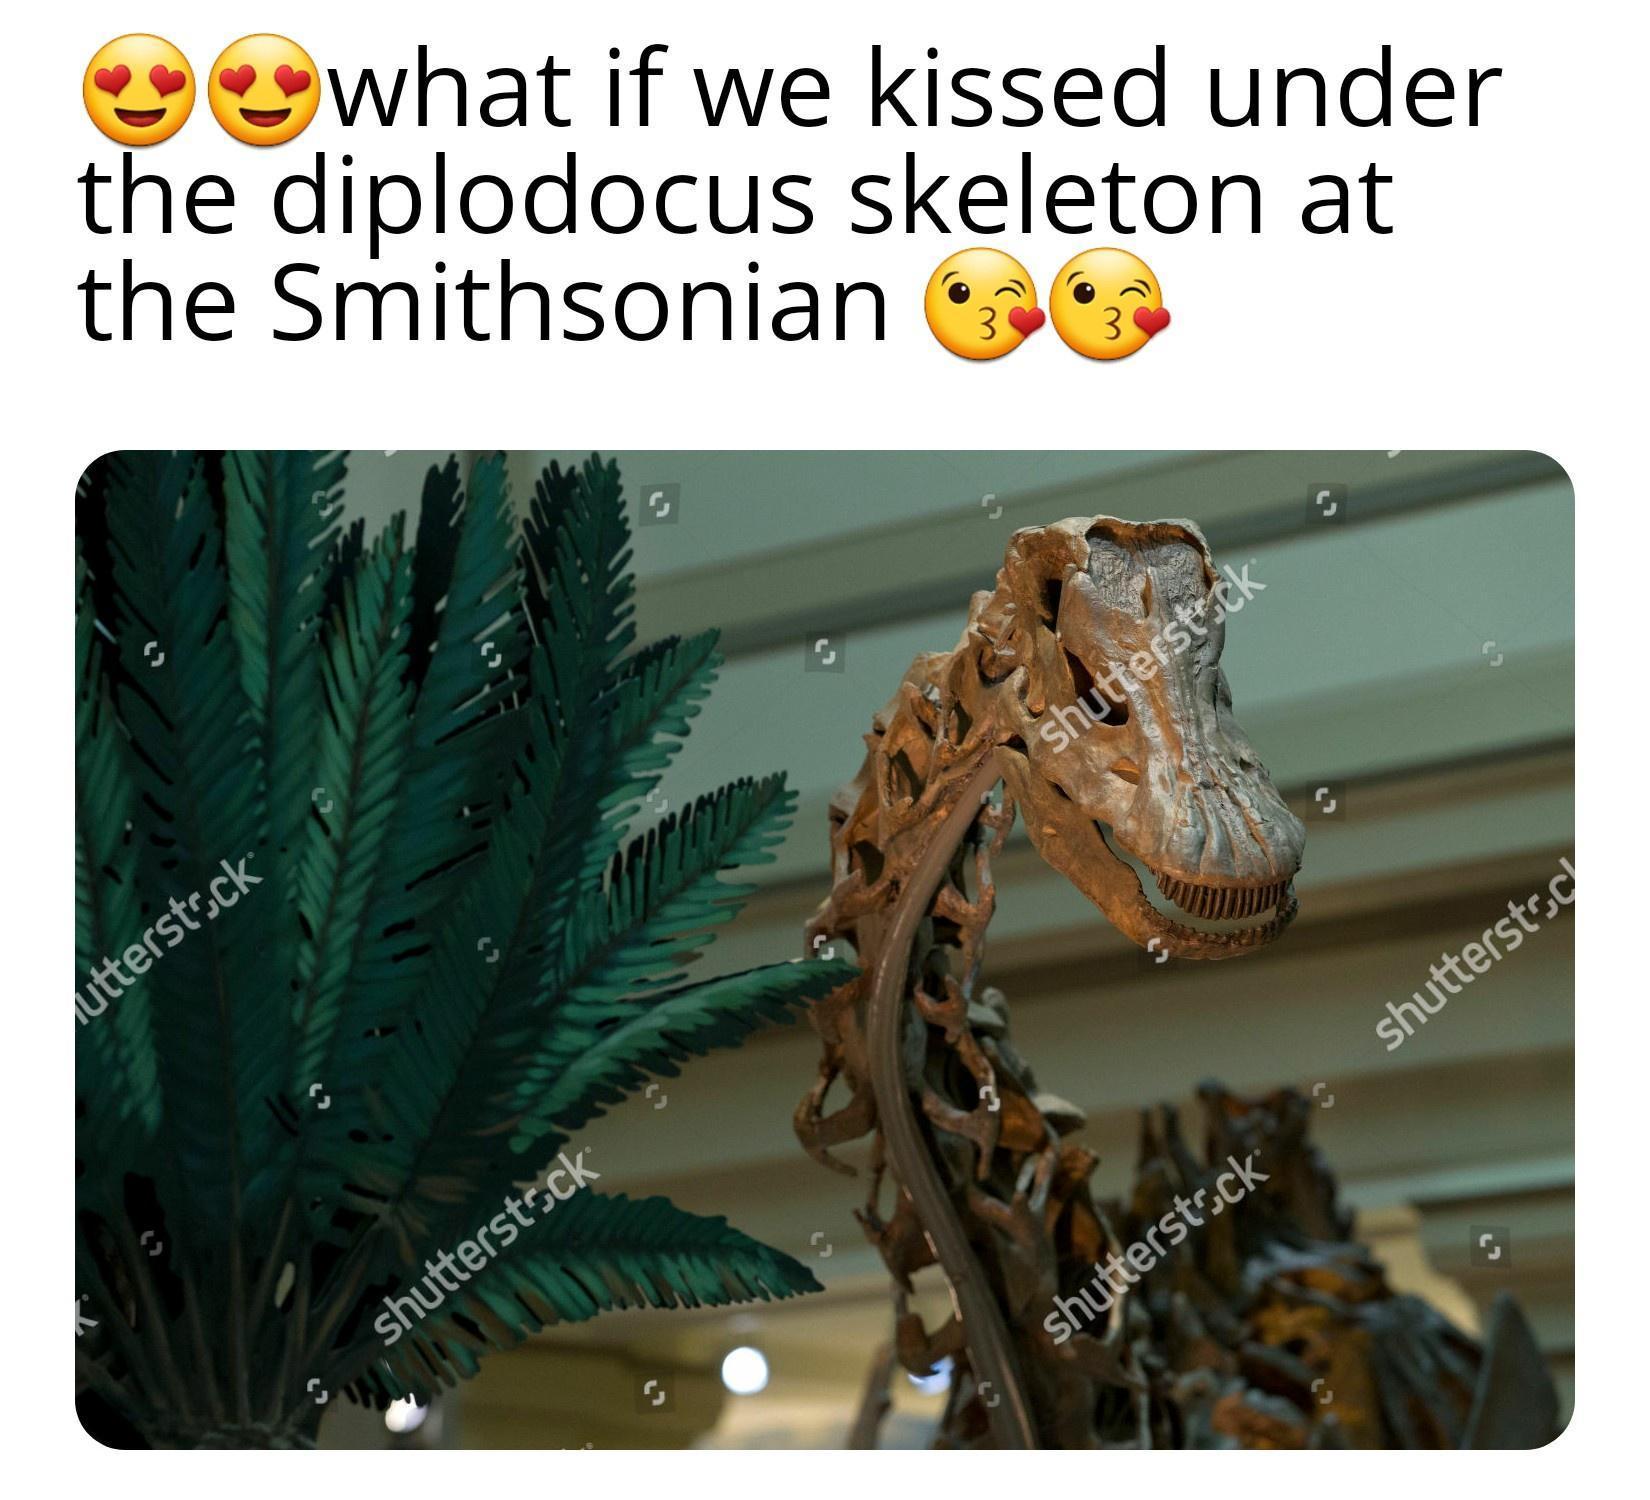 funny memems and tweetsfauna - the what if we kissed under diplodocus skeleton at the Smithsonian utterstock shutterstock 3 3 shutterstock shutterstock shutterstoc